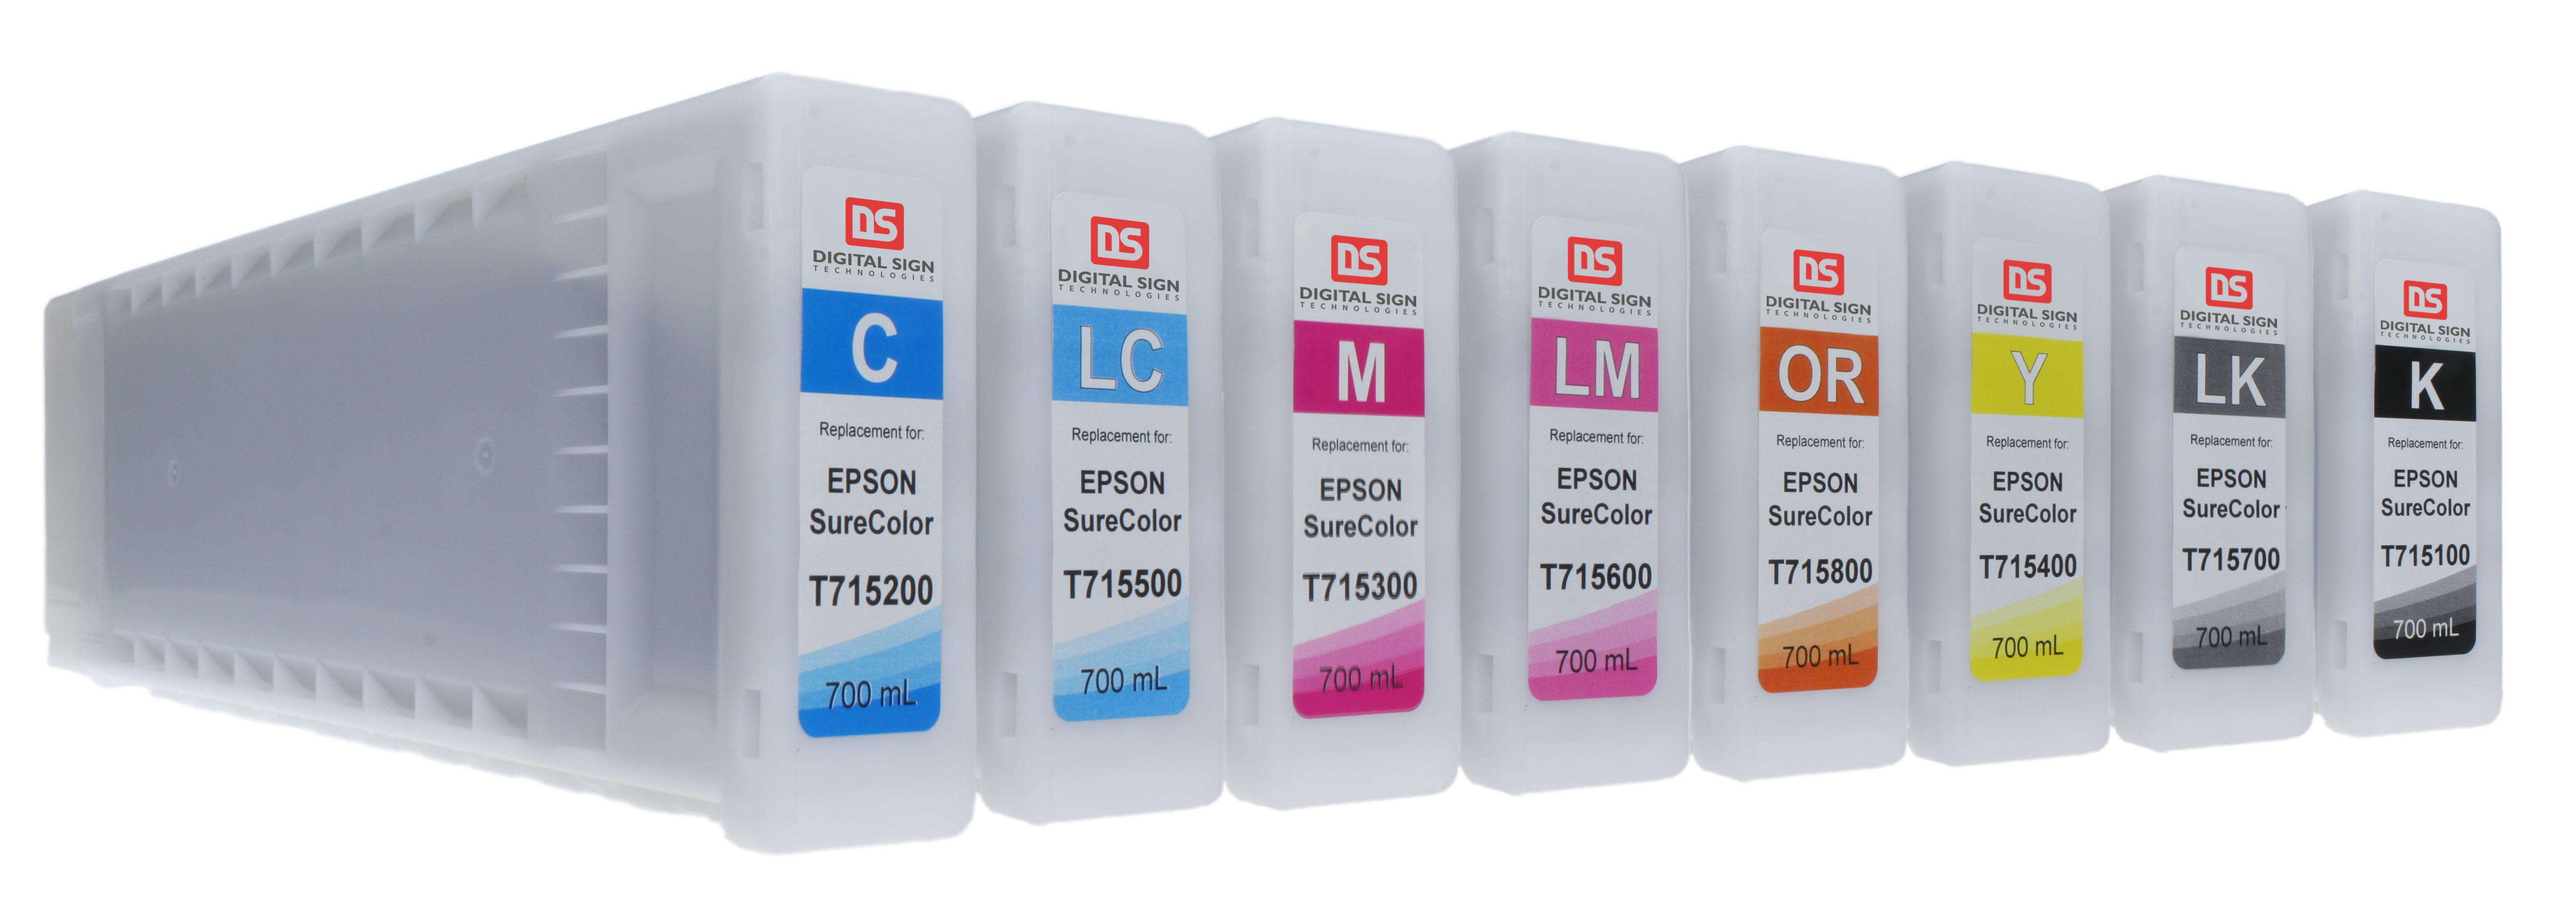 Epson UltraChrome GSX ink cartridges by DST